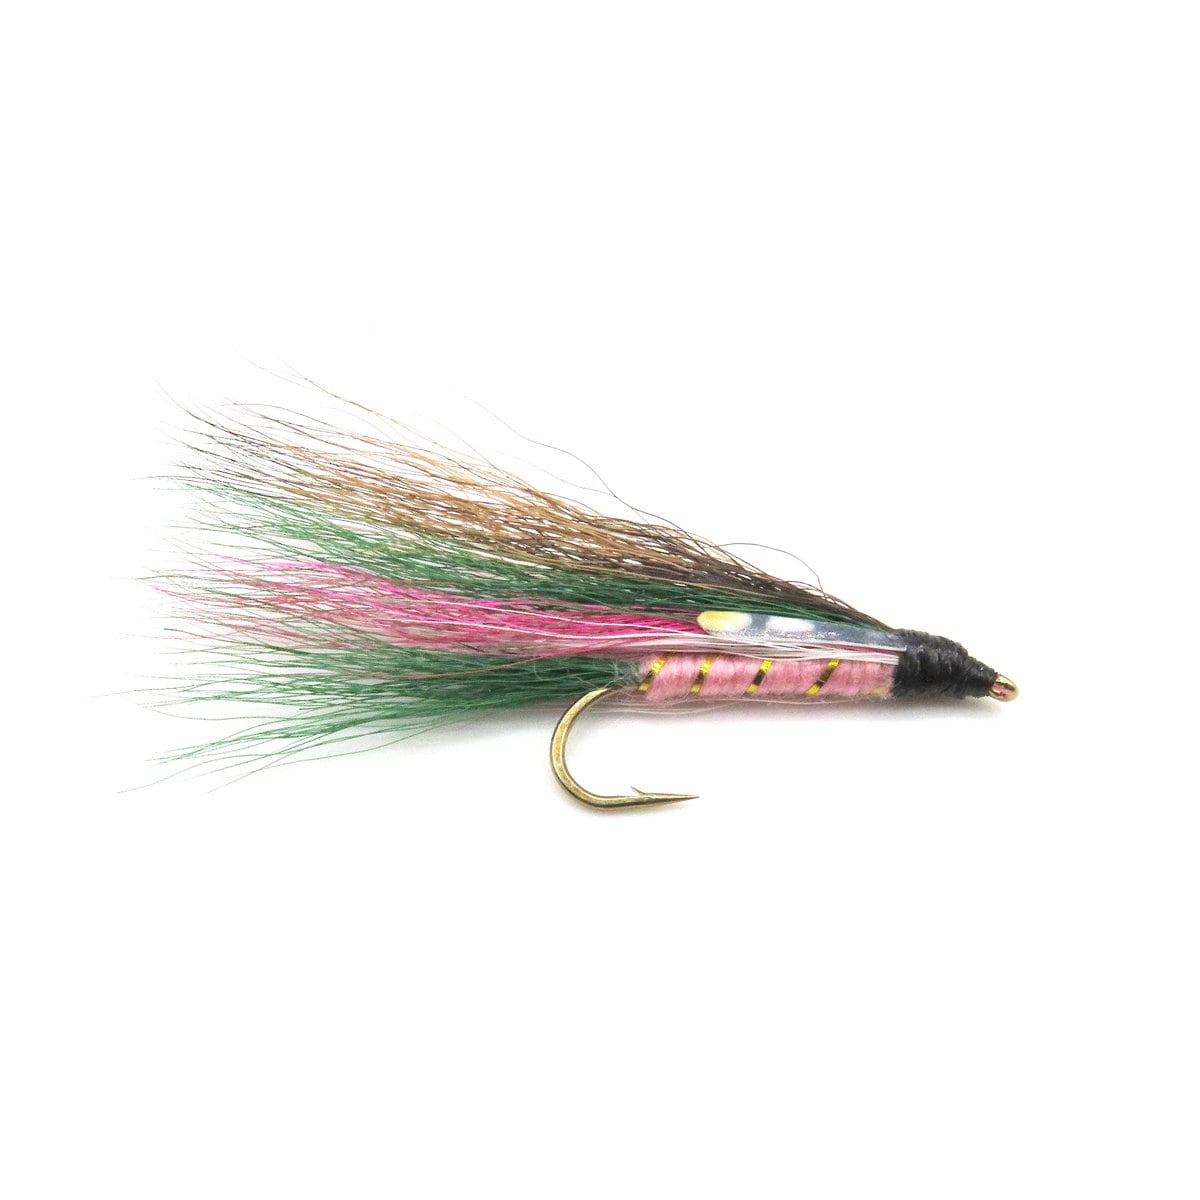 Little Rainbow Trout Streamer Streamer Flies for Trout Fly Fishing